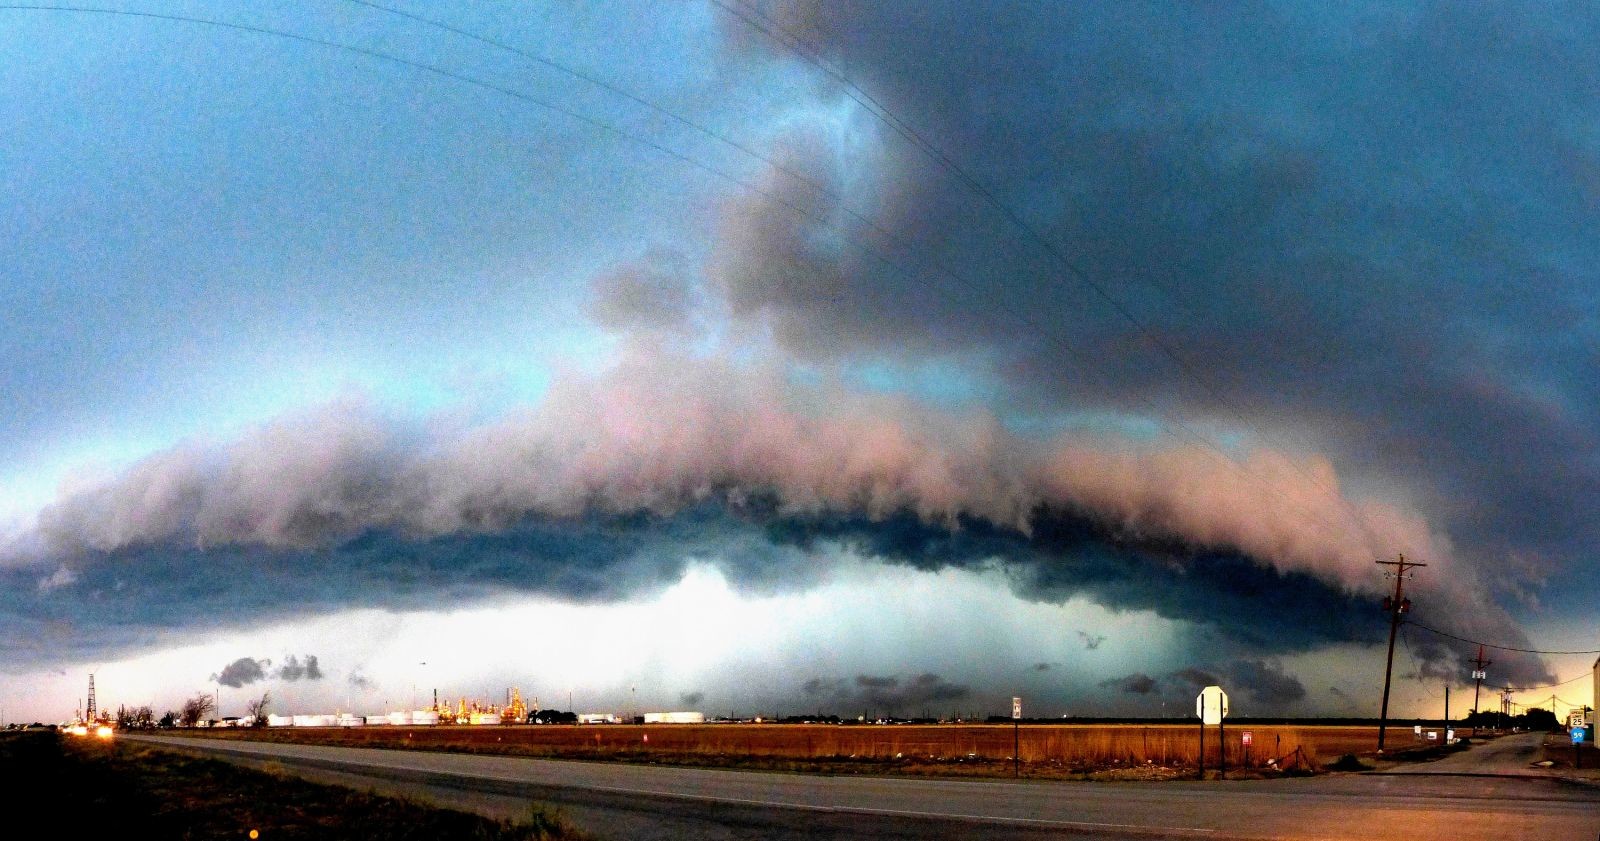 Amazing picture of Supercell over Artesia, NM